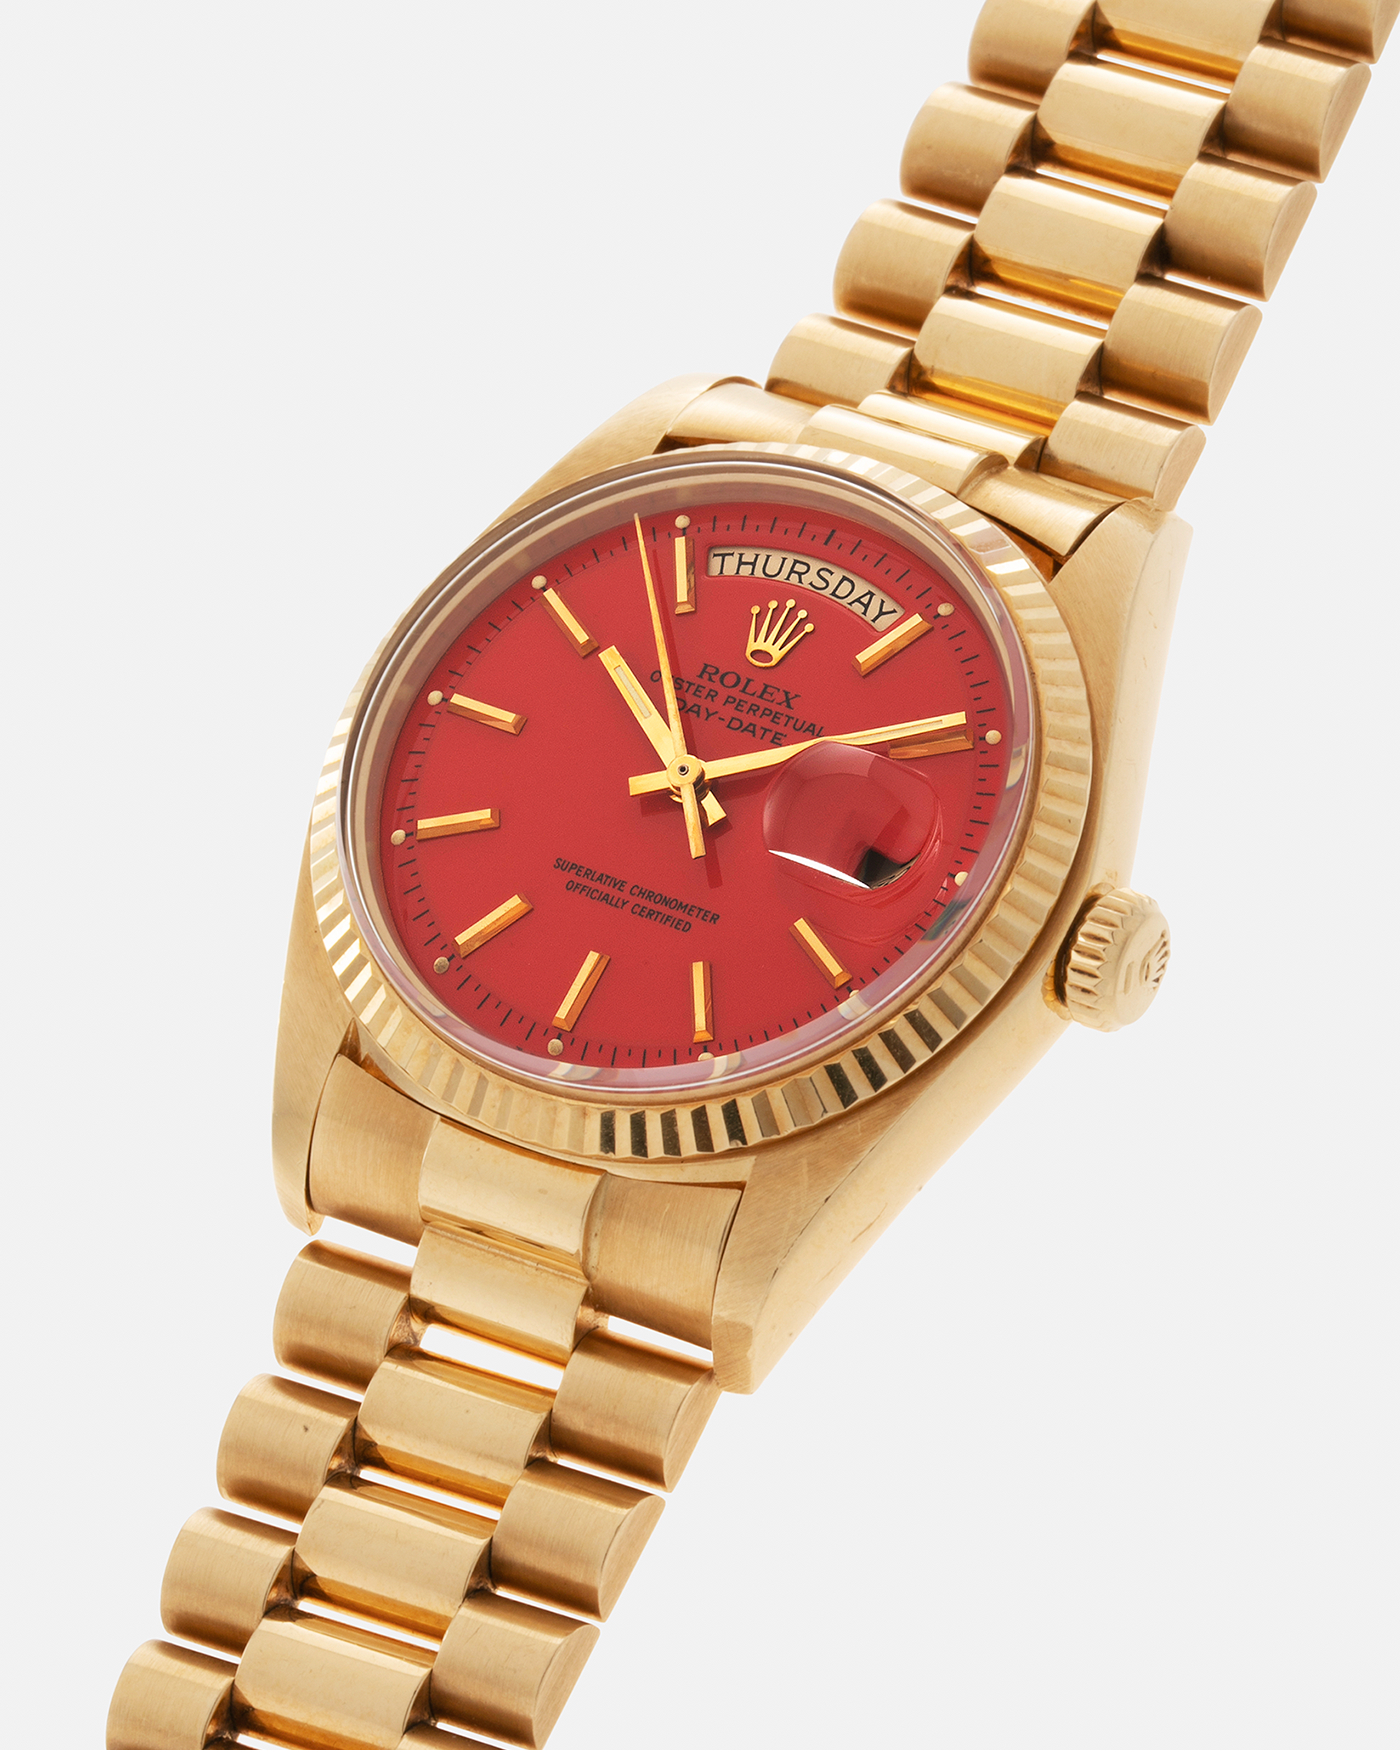 Brand: Rolex Year: 1978 Model: Day-Date, Coral Red ‘Stella’ Reference Number: 1803 Serial: 510XXXX Material: 18-carat Yellow Gold Movement: Rolex Cal. 1556, Self-Winding Case Diameter: 36mm Lug Width: 20mm Bracelet: Rolex 18-carat Yellow Gold ‘F18000’ Stamped Presidential Bracelet with ‘55’ Curved End Links